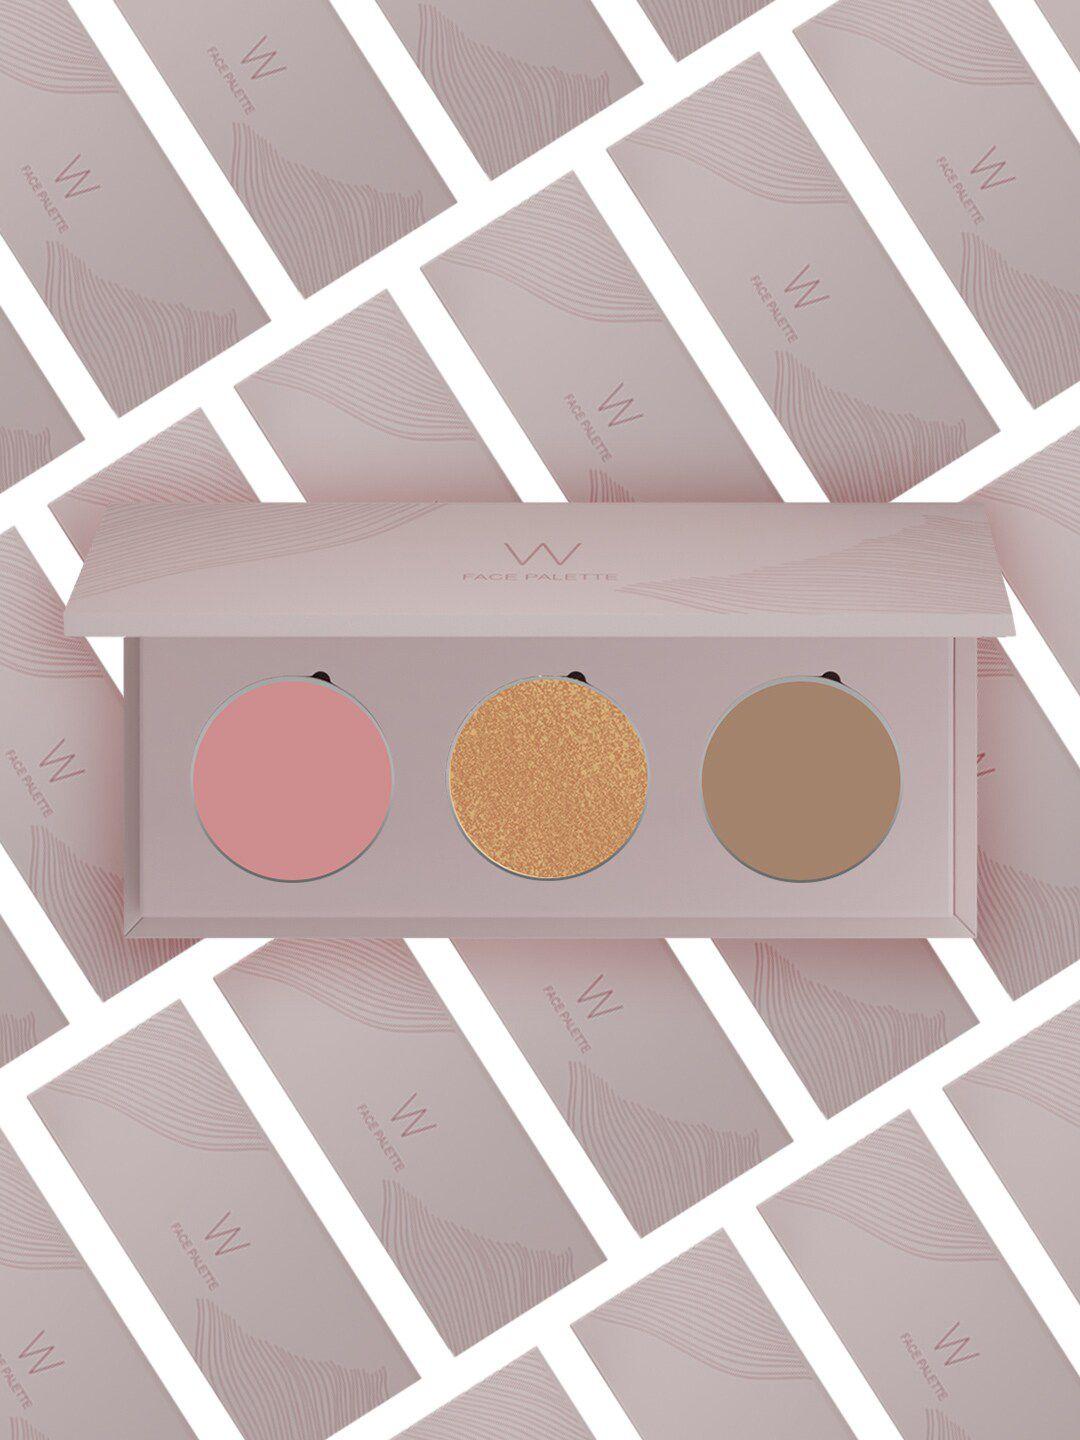 w face palette be yourself